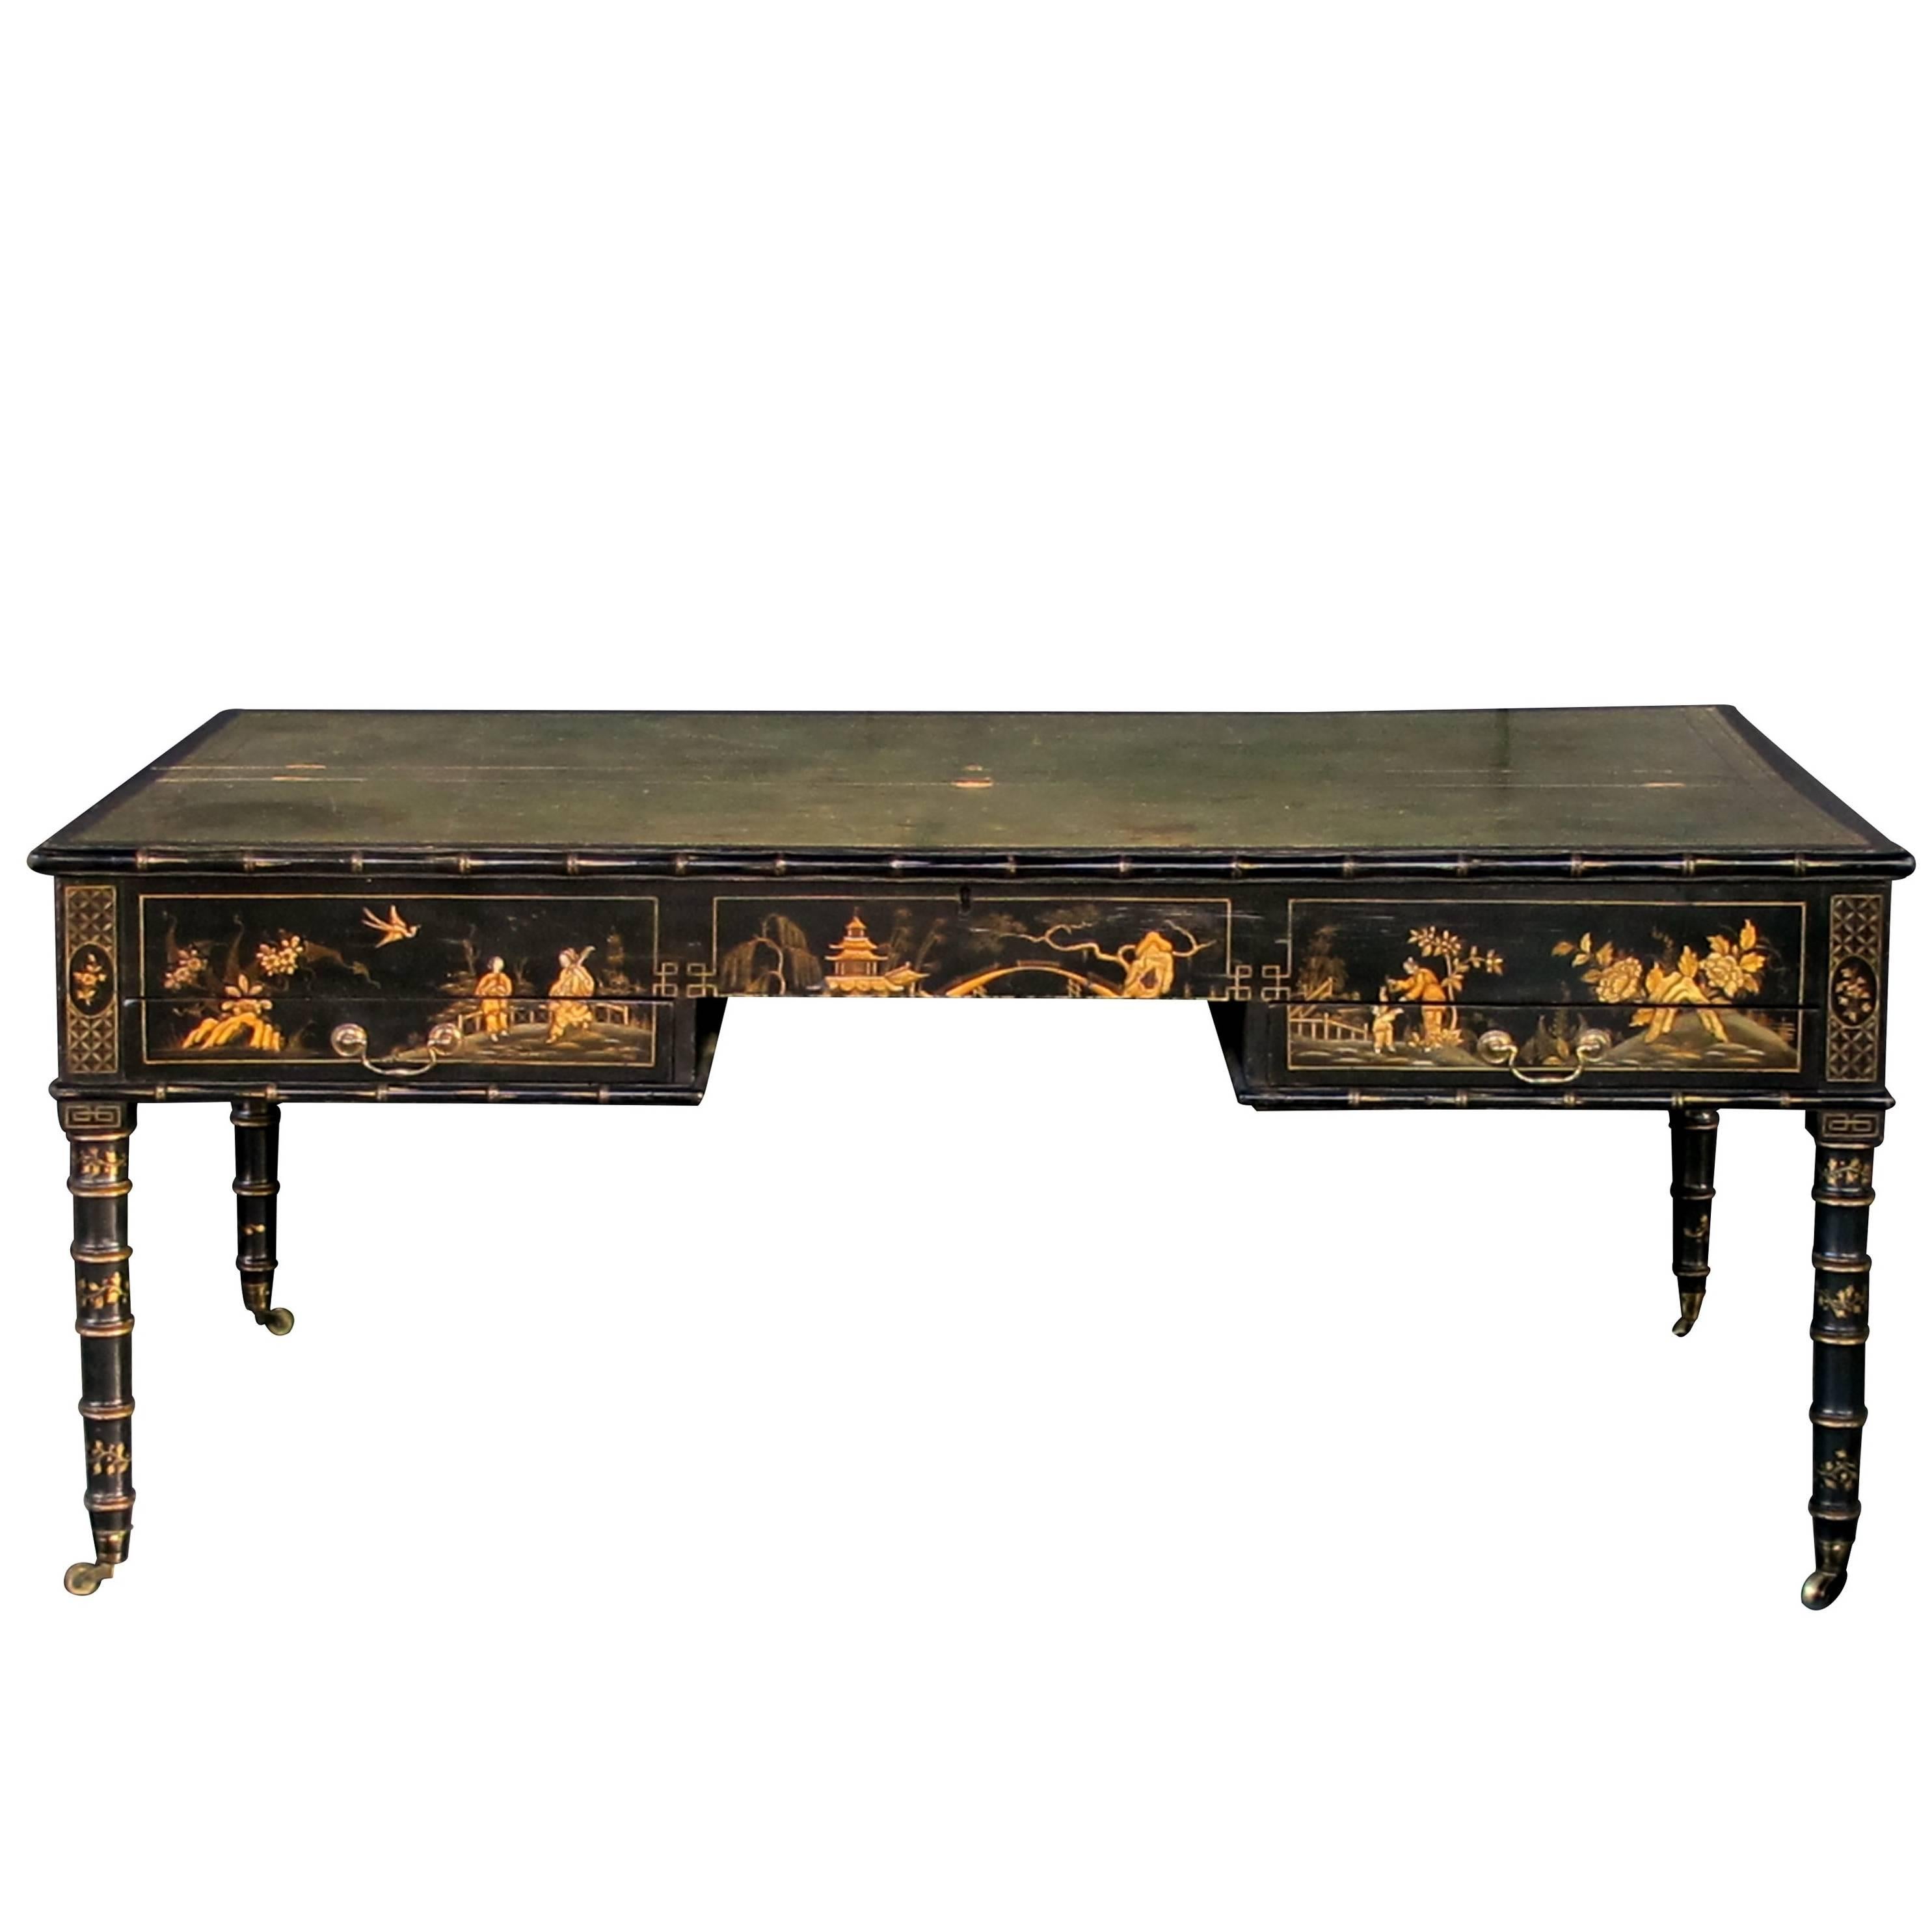 Rare English Regency Style Japanned Map Table Now Adapted as a Partners Desk